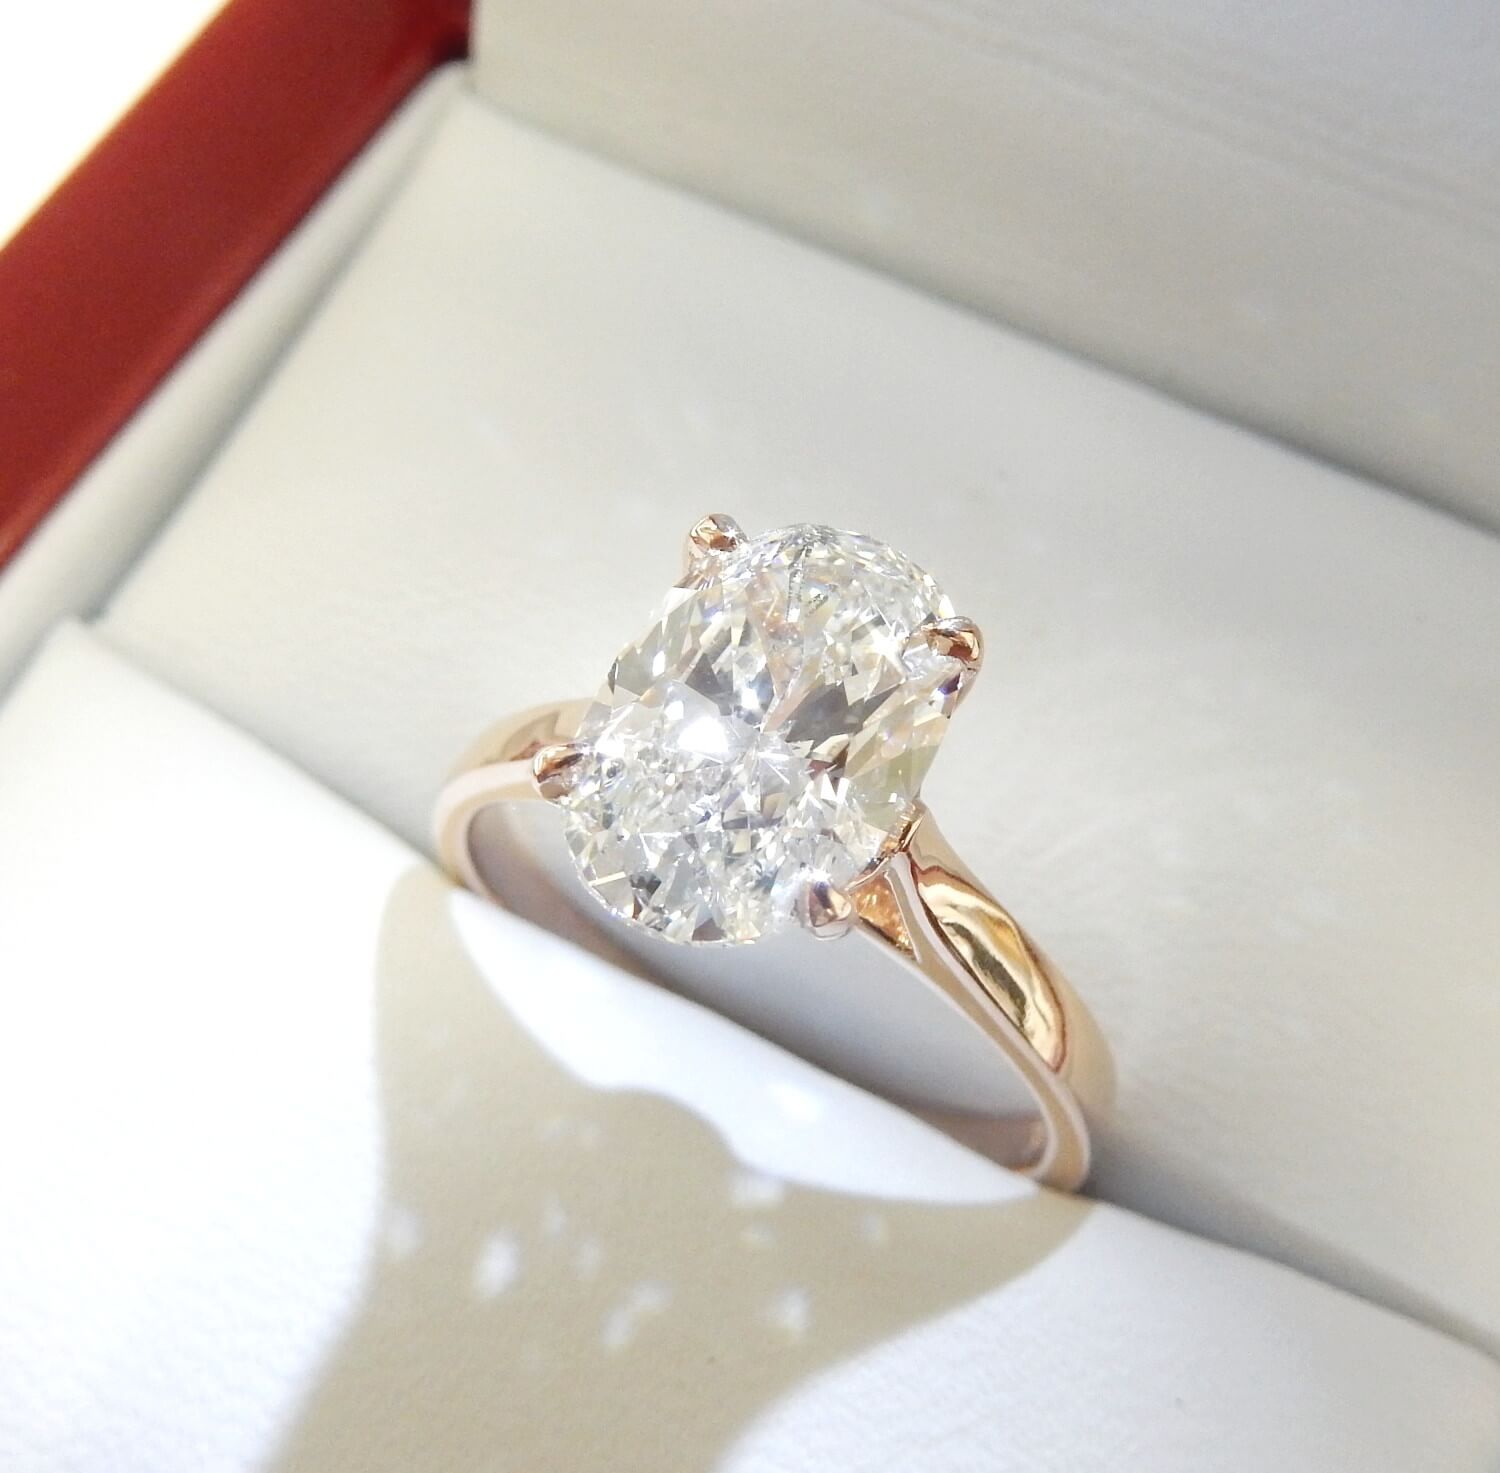 Cari - 14K White-Yellow Gold Hidden Halo Oval Diamond Engagement Ring -  Paul's Jewelry-Jewelry is Personal.